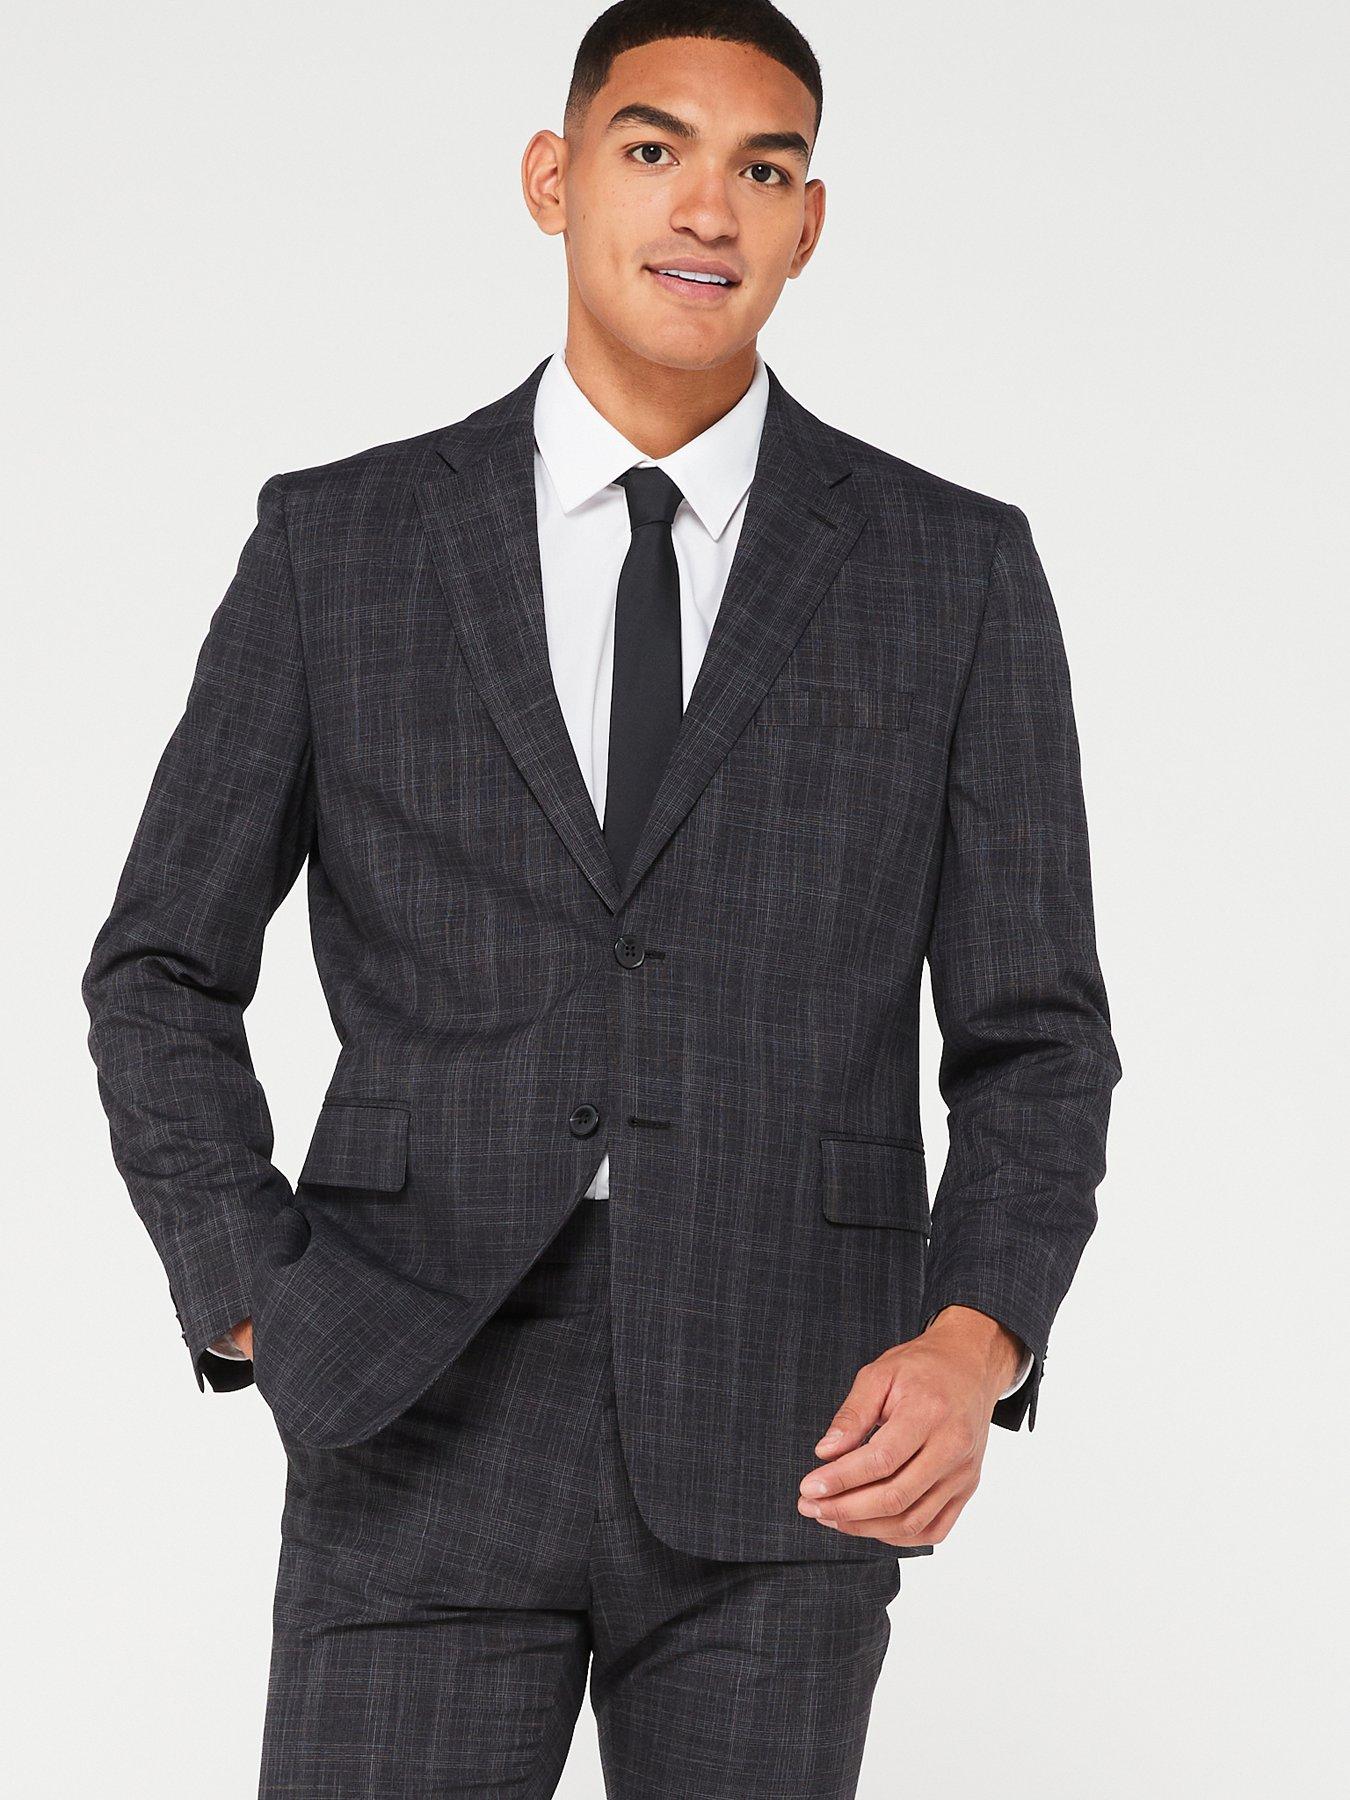 Grey Check Blazer Outfits For Men (222 ideas & outfits)